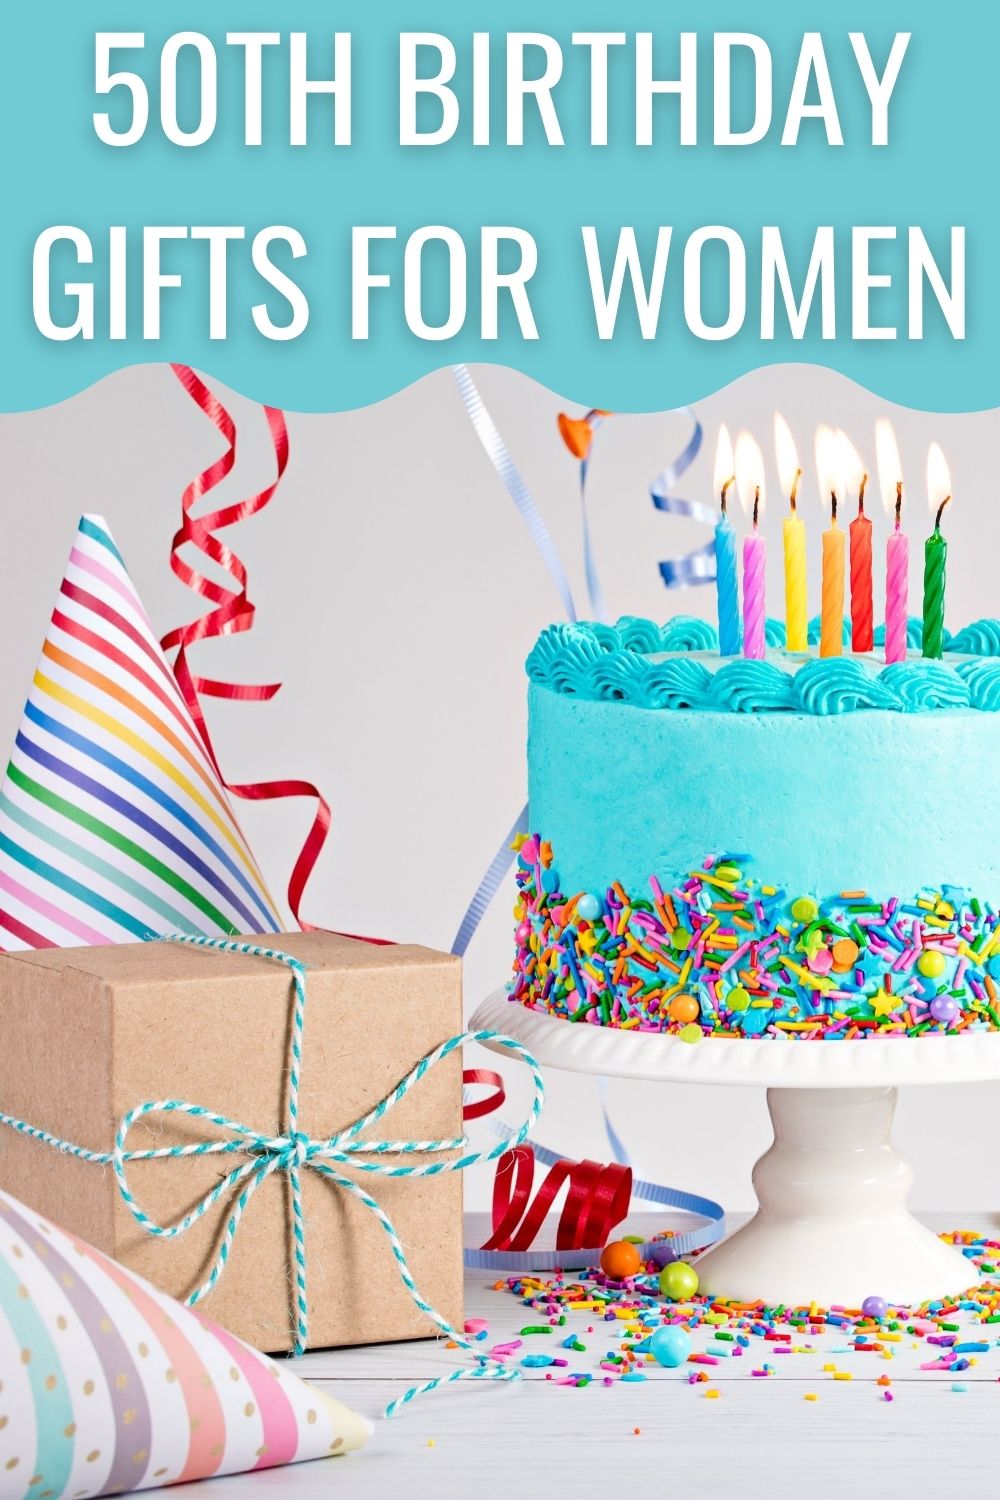 50th birthday gifts for women